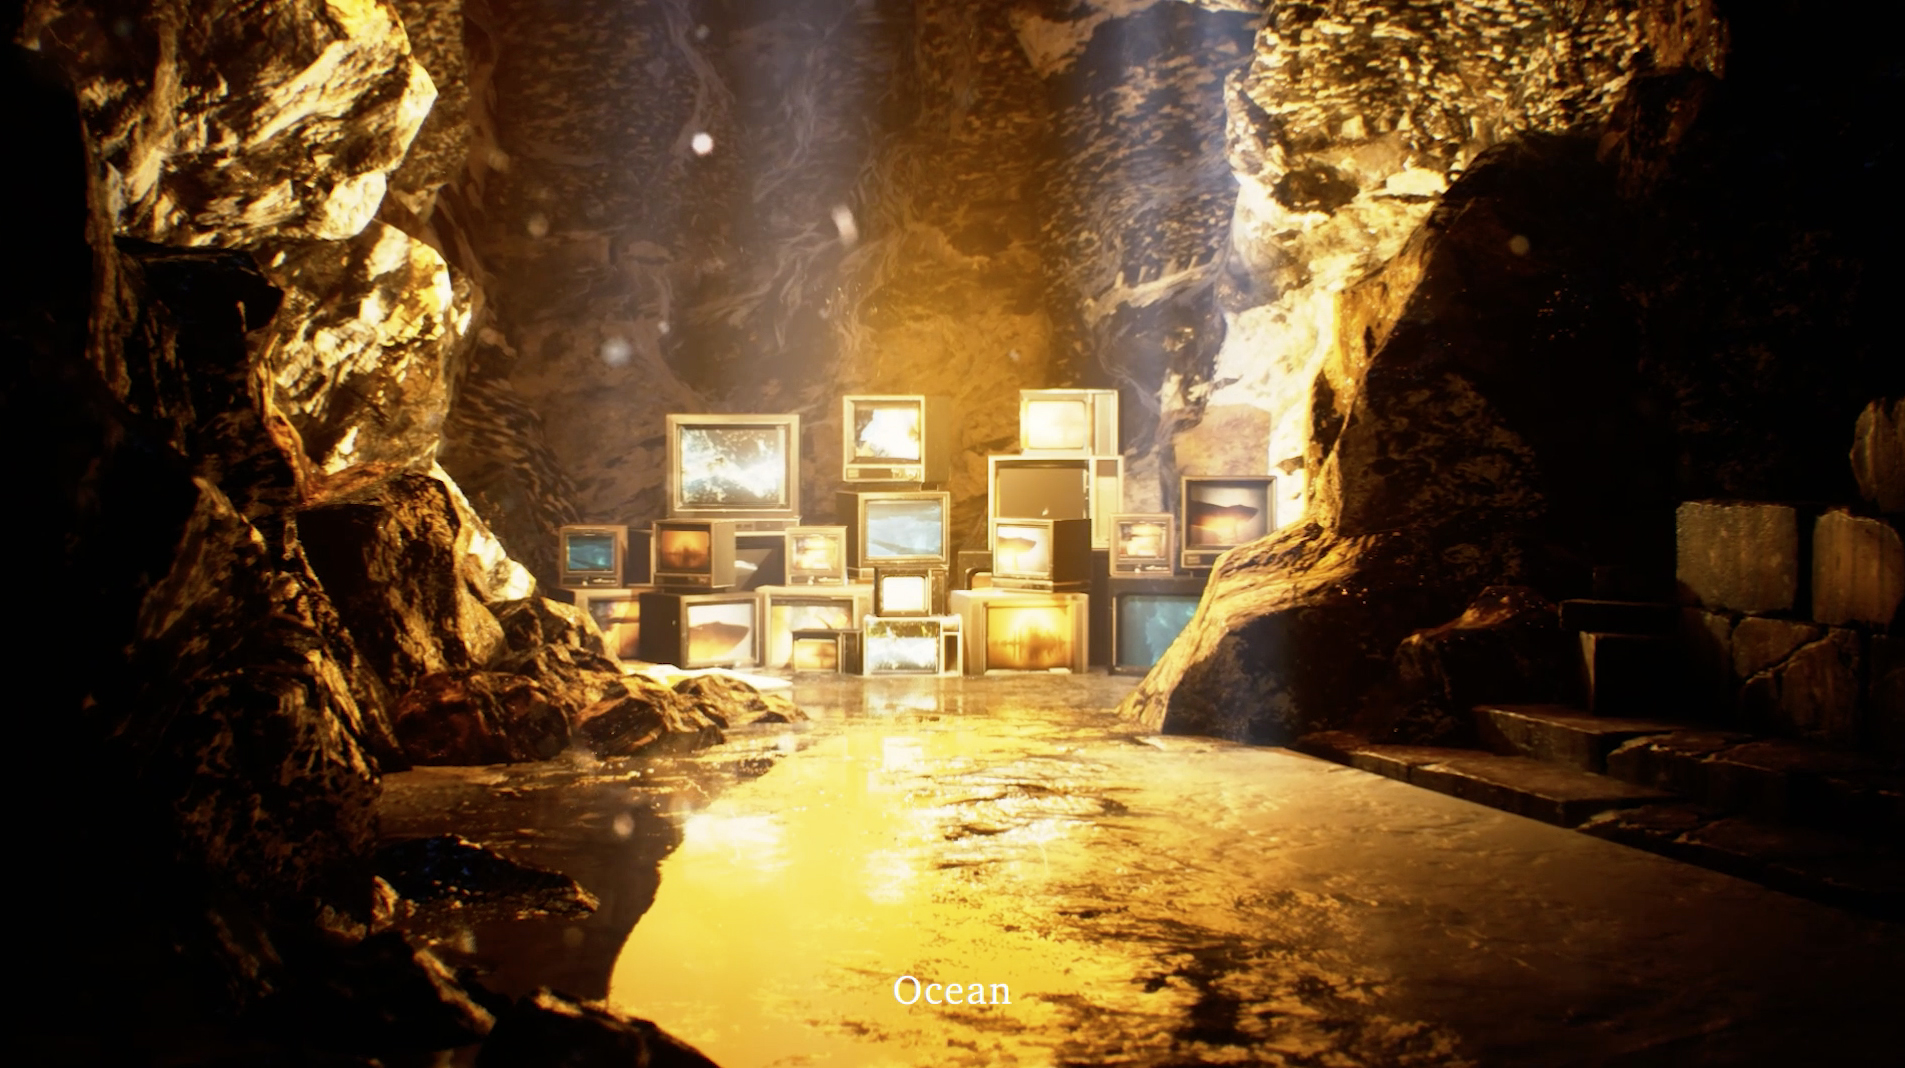 Still from a digital animation showing televisions in a cave with water